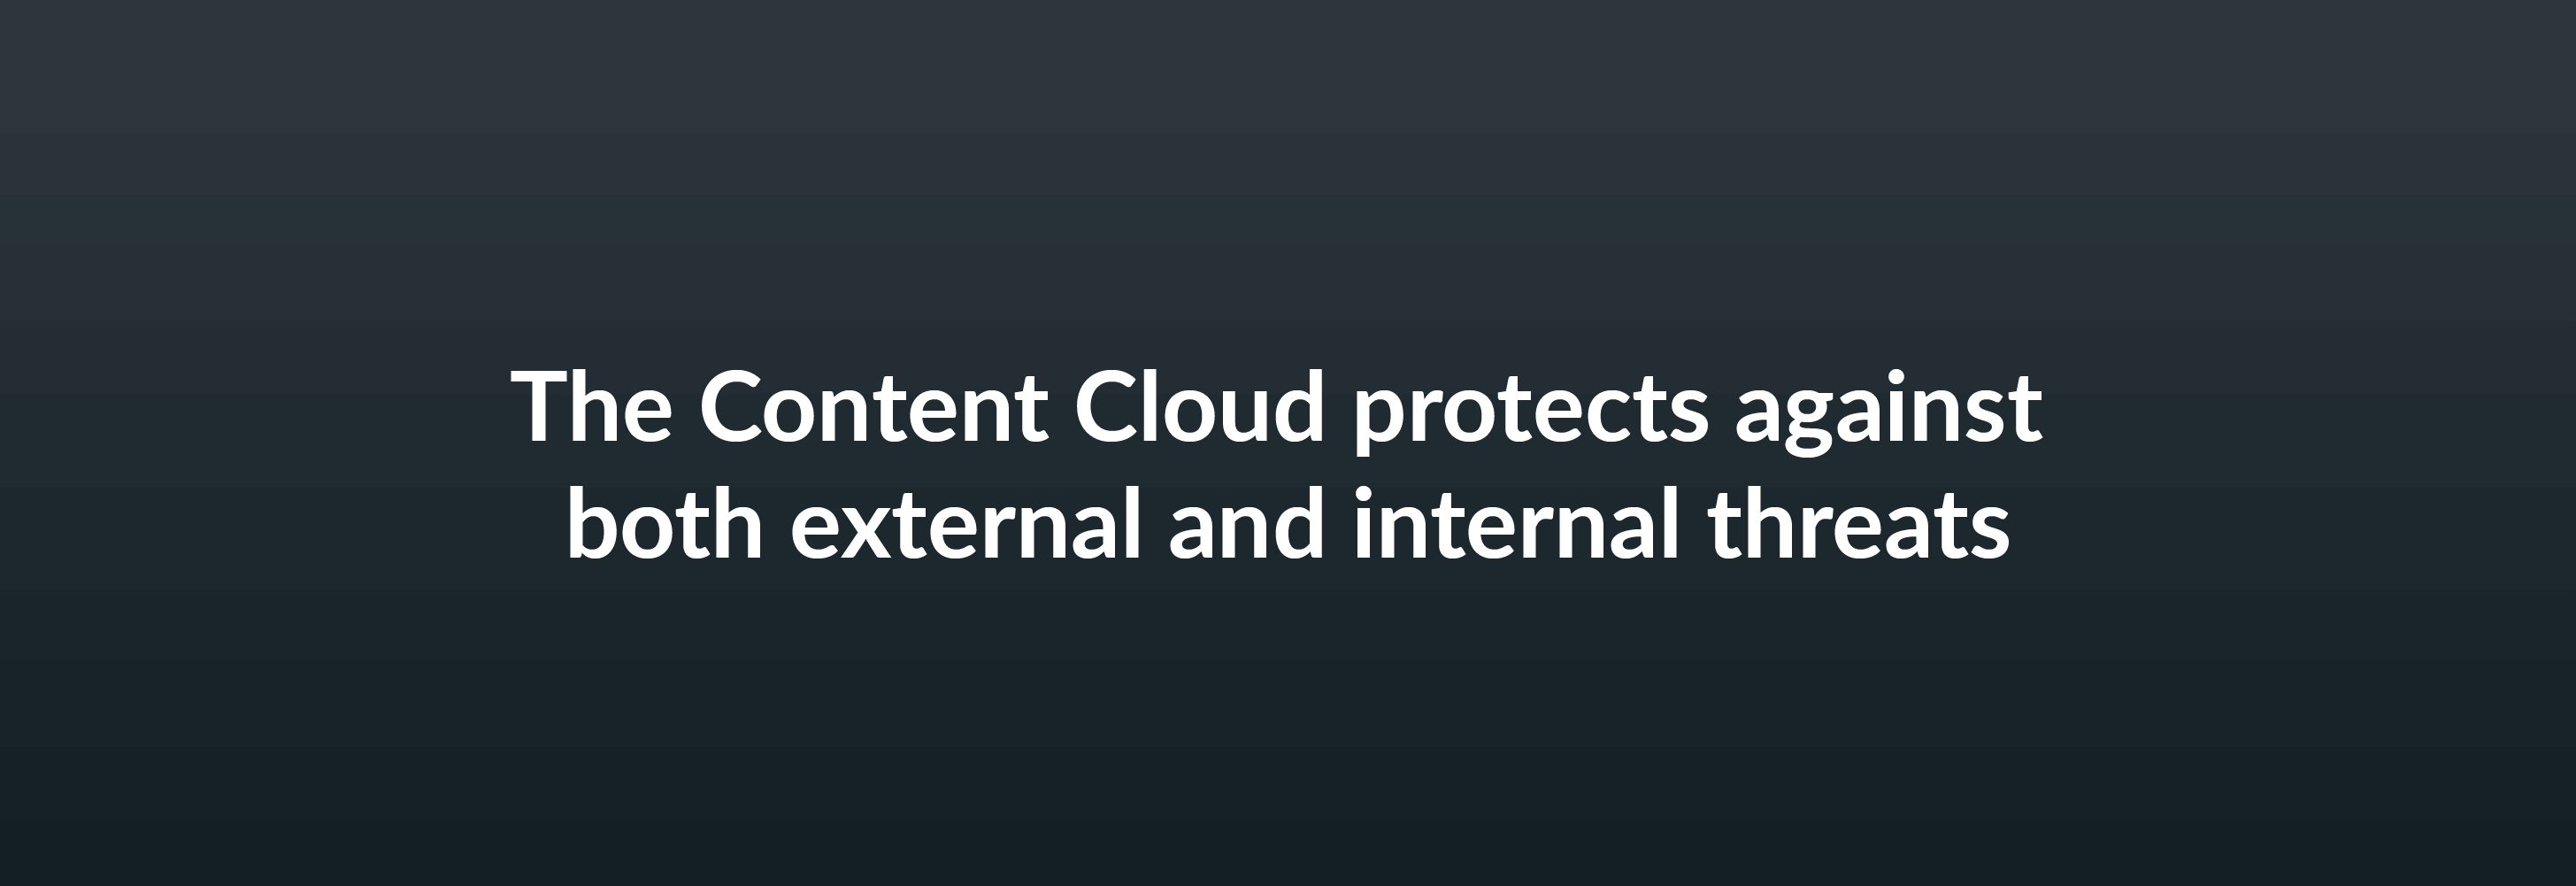 The Content Cloud protects against both external and internal threats